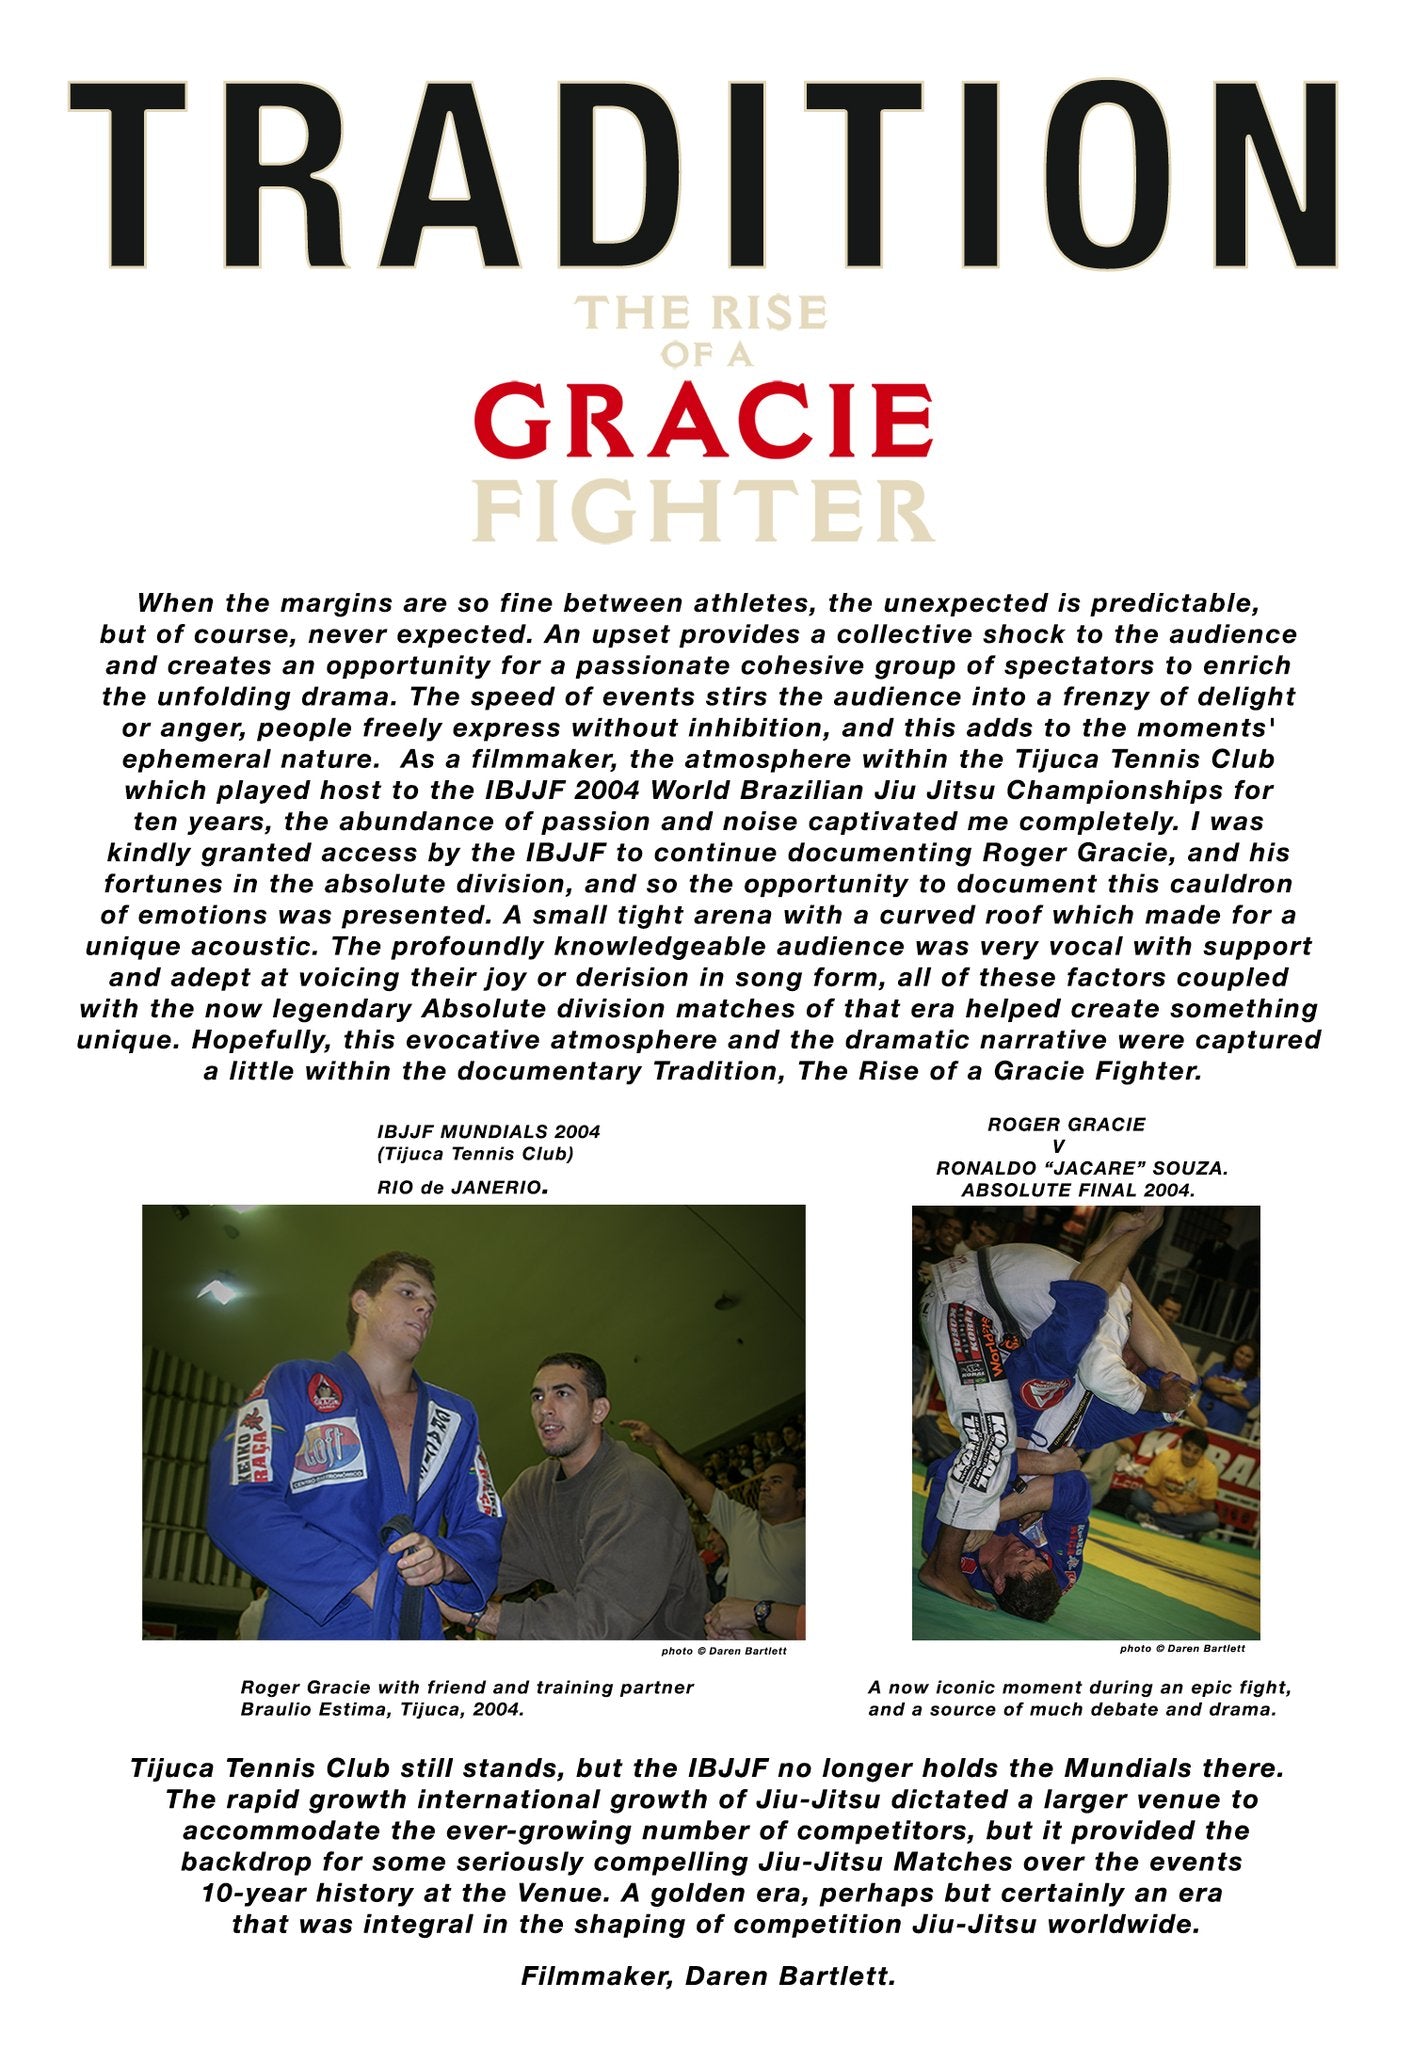 Tradition, The Rise of a Gracie Fighter DVD (Roger Gracie Documentary) - Budovideos Inc